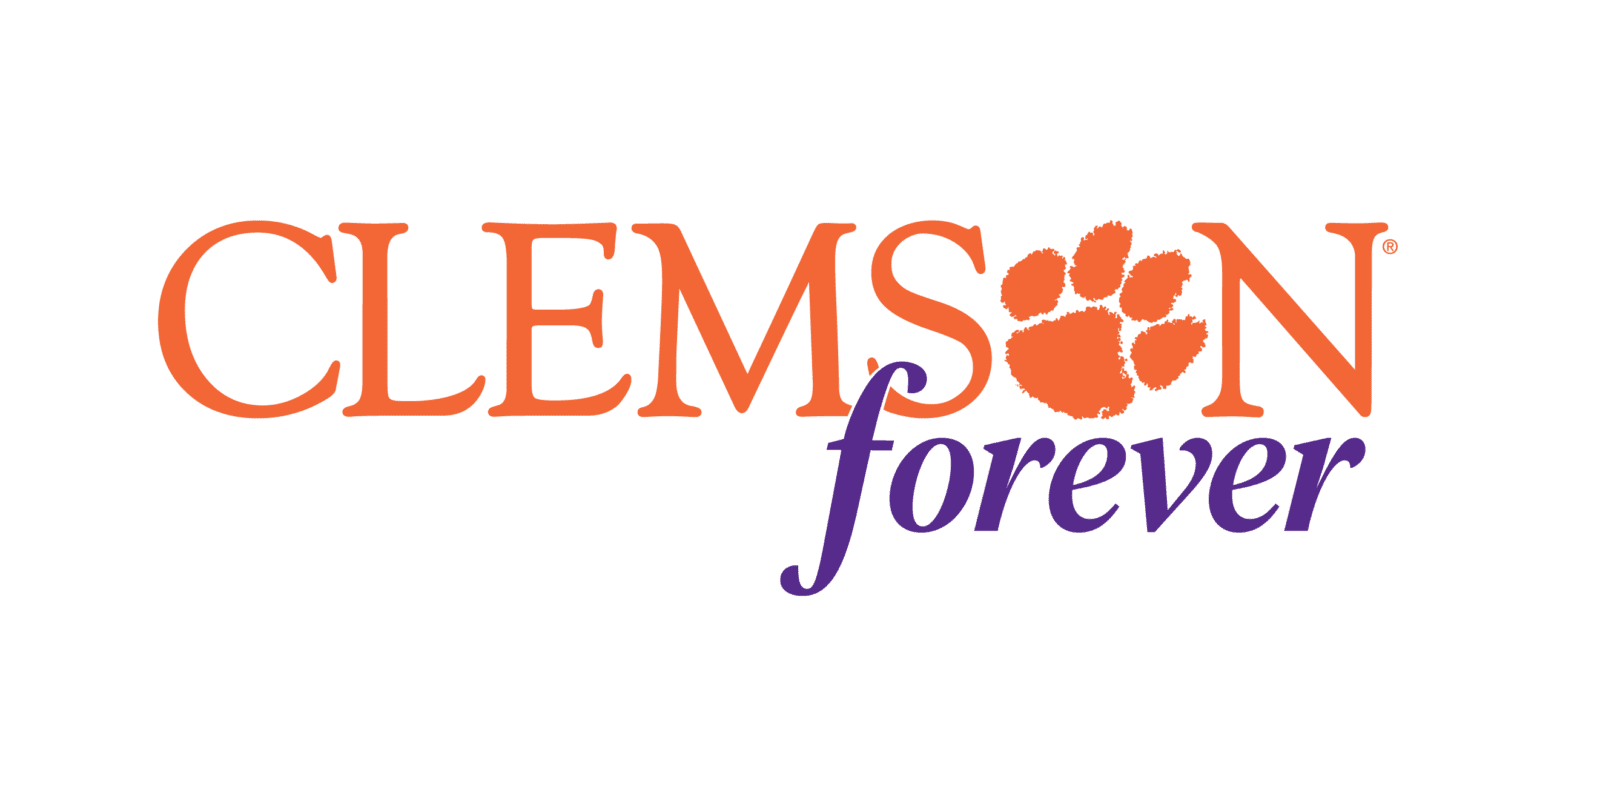 Clemson forever - O is a tiger paw